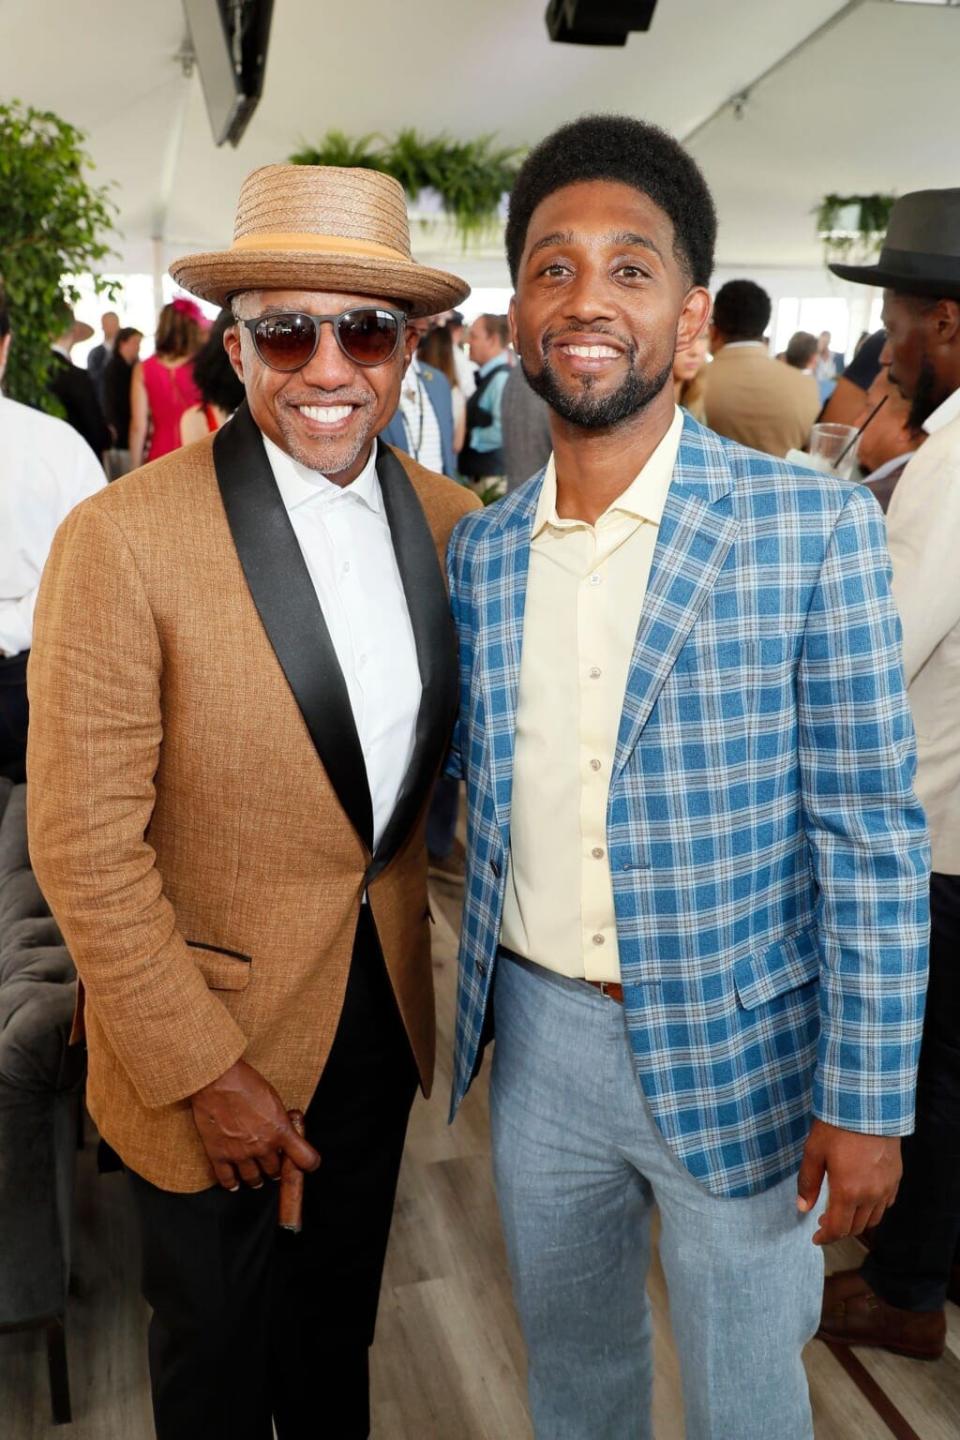 BALTIMORE, MARYLAND – MAY 21: Kevin Liles and Mayor Brandon Scott attends Preakness 147 in the 1/ST Chalet hosted by 1/ST at Pimlico Race Course on May 21, 2022 in Baltimore, Maryland. (Photo by Paul Morigi/Getty Images for 1/ST)